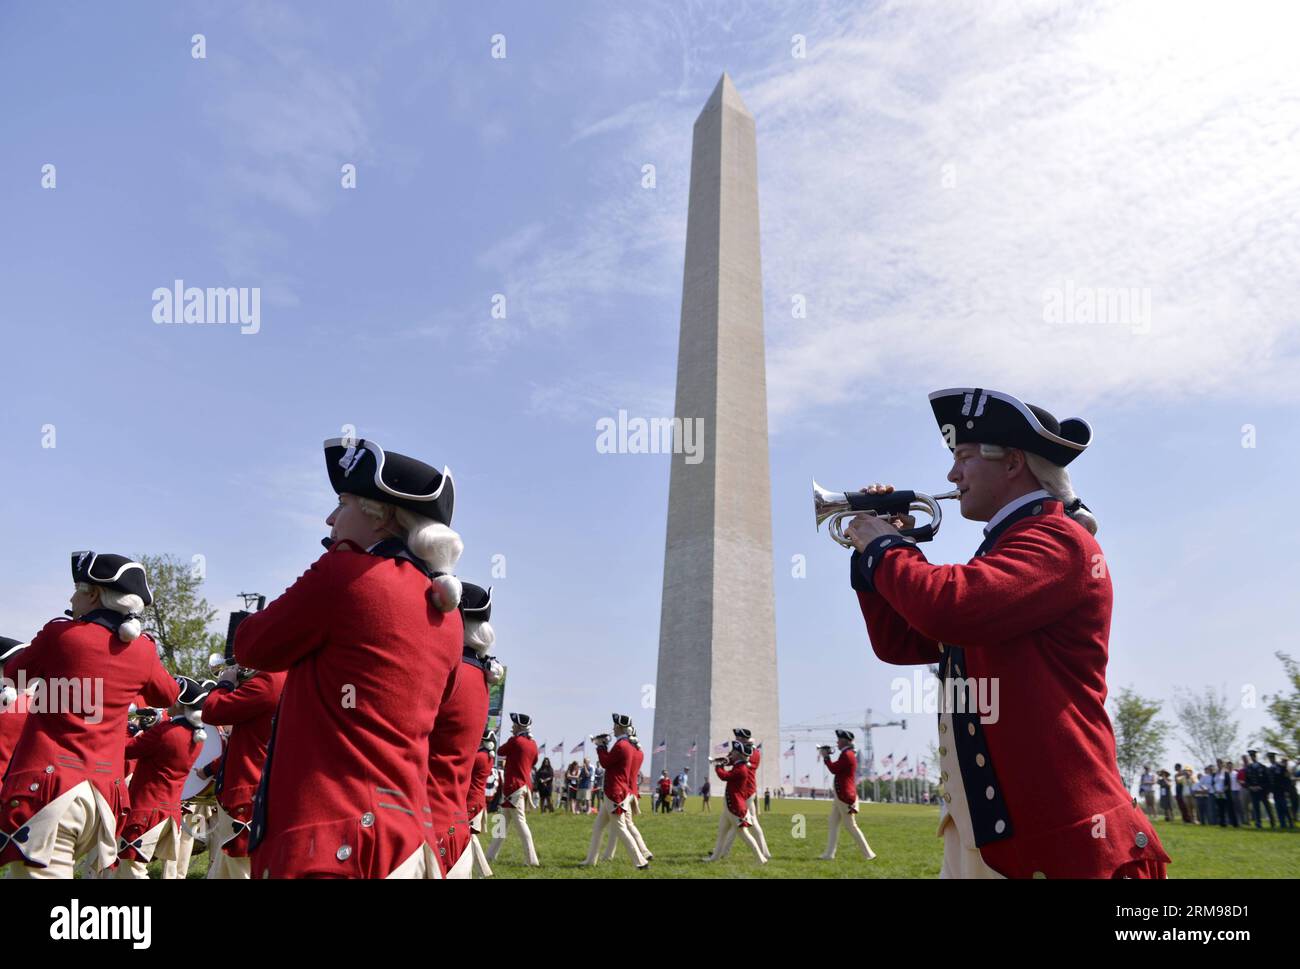 (140512) -- WASHINGTON D.C., May 12, 2014 (Xinhua) -- Soldiers of a military band perform during the reopening ceremony of the Washington Monument, in Washington D.C., the United States, on May 12, 2014. The iconic Washington Monument in this American national capital on Monday reopened on completion of 32-month repairs with a cost of 15 million U.S. dollars.(Xinhua/Yin Bogu) U.S.-WASHINGTON MONUMENT-REOPENING PUBLICATIONxNOTxINxCHN   Washington D C May 12 2014 XINHUA Soldiers of a Military Tie perform during The Reopening Ceremony of The Washington Monument in Washington D C The United States Stock Photo